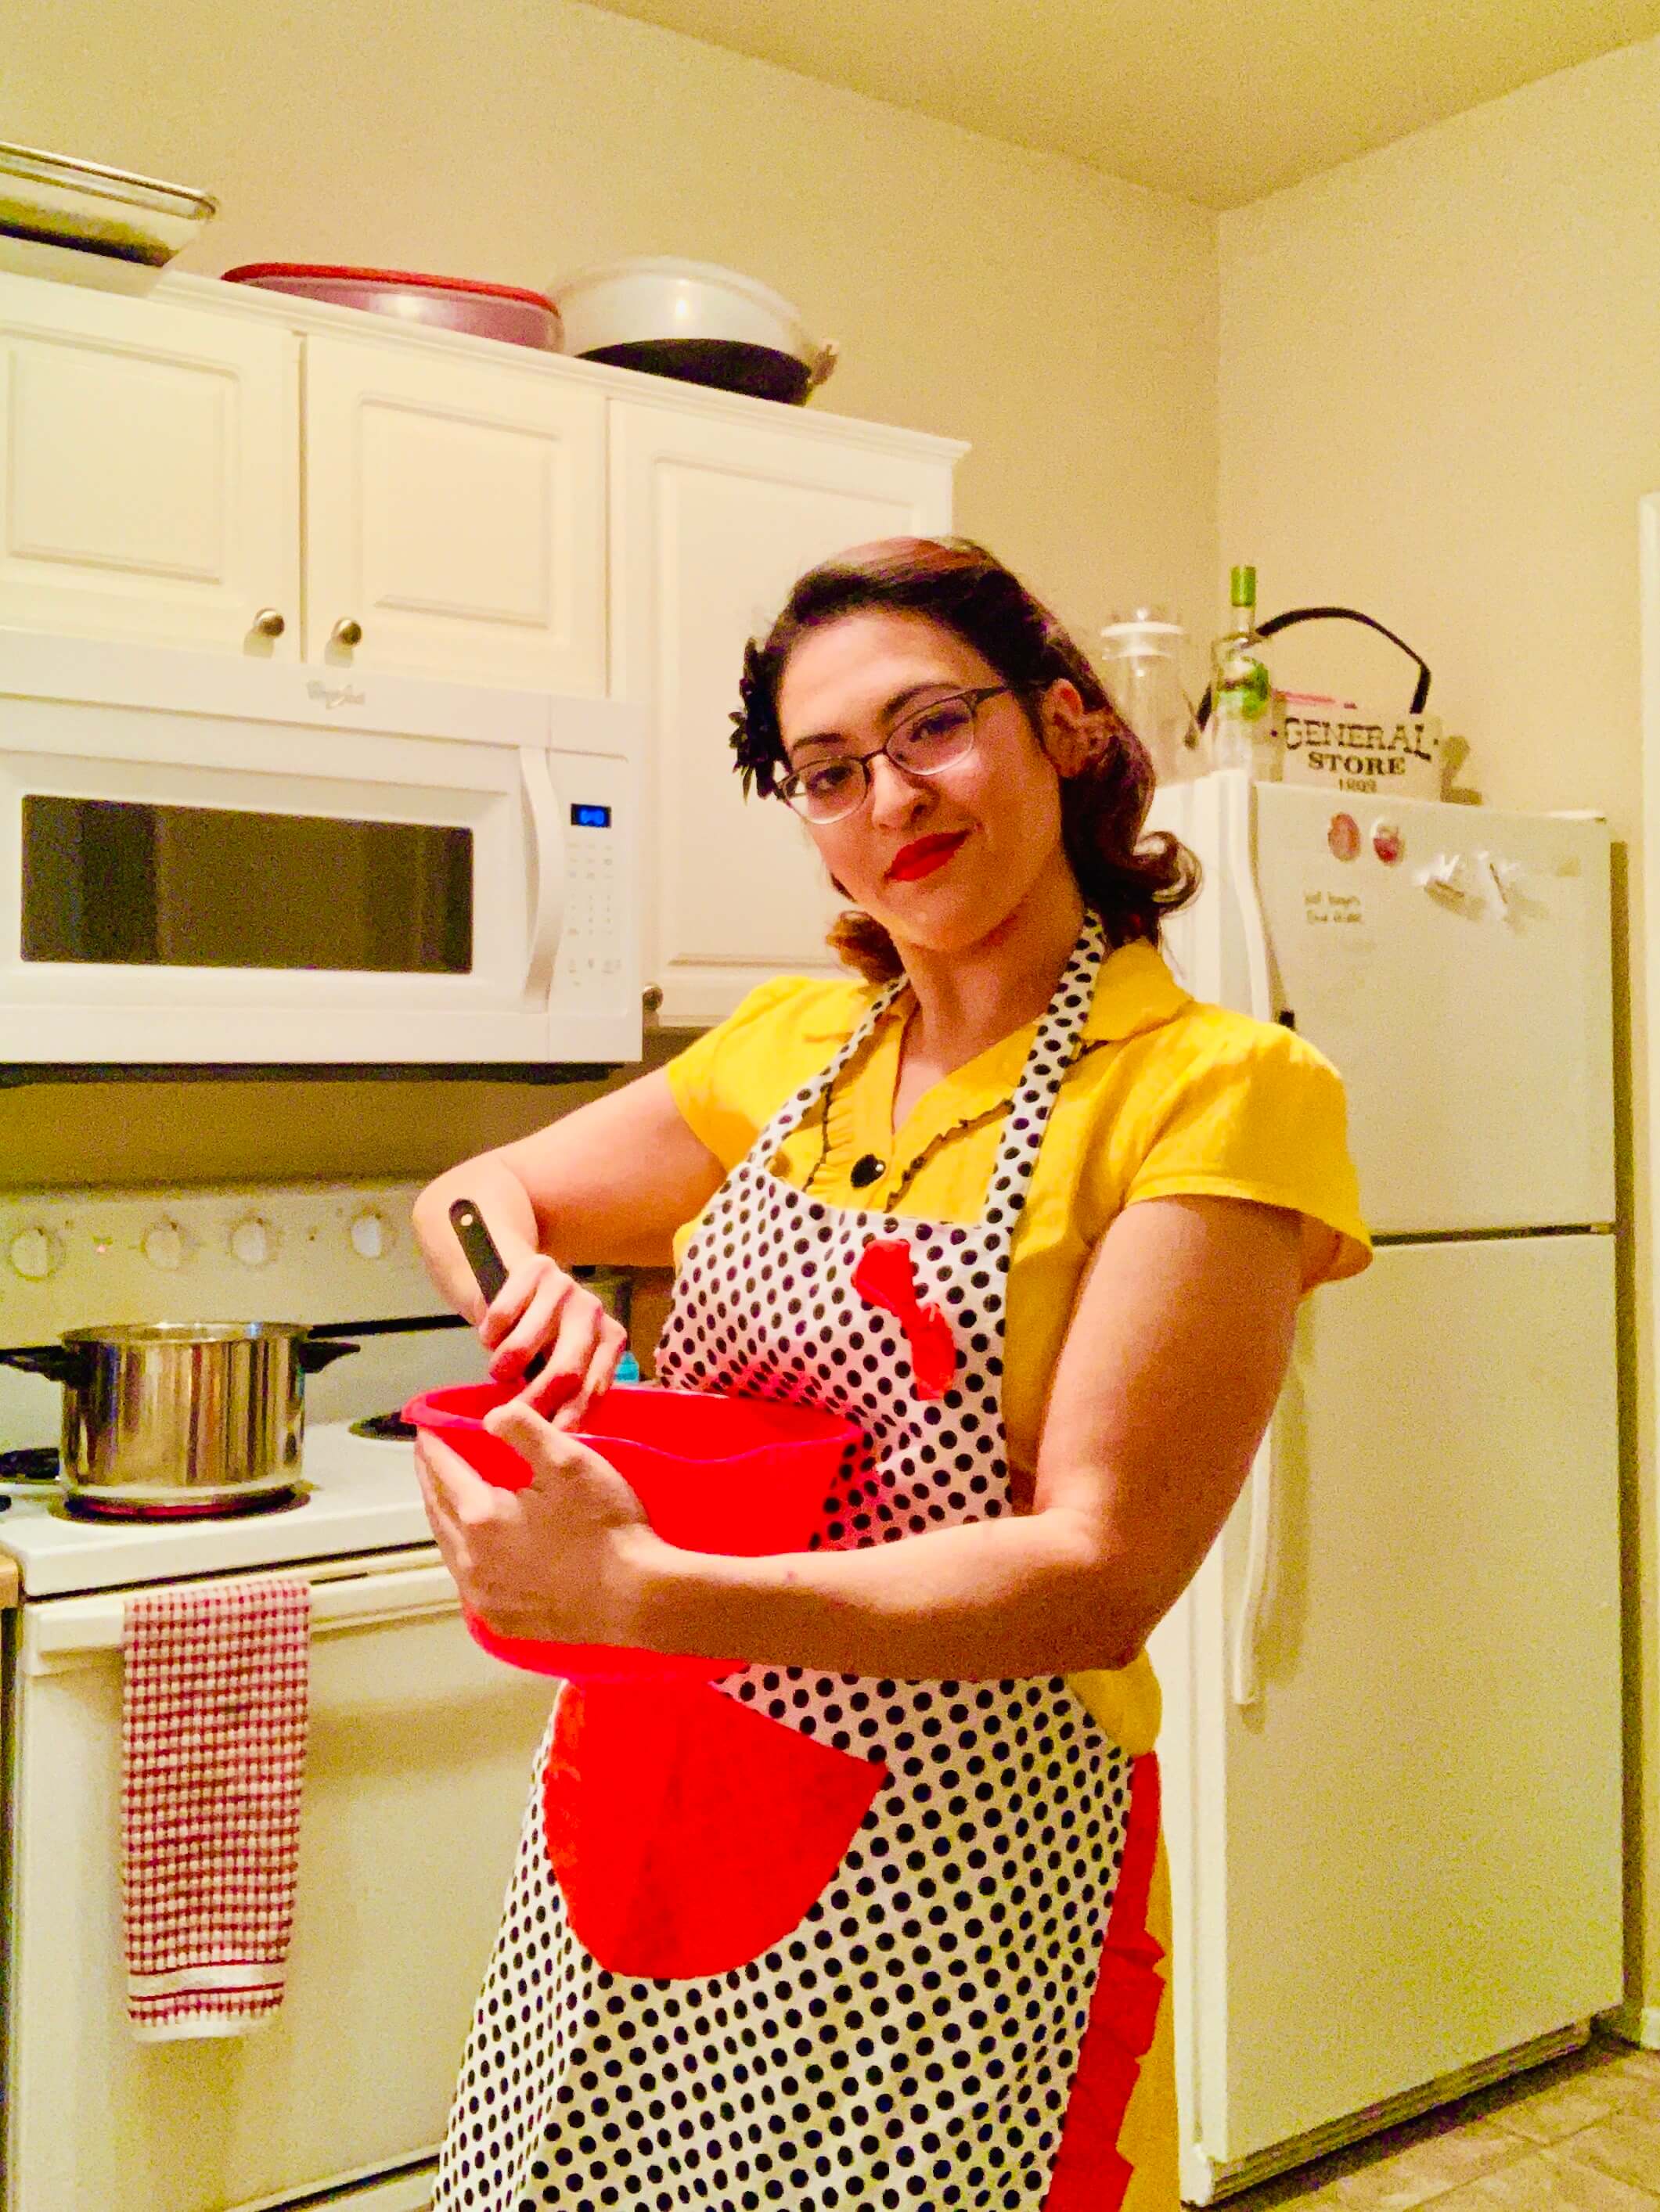 Veronica Kuta on her spare time cooking